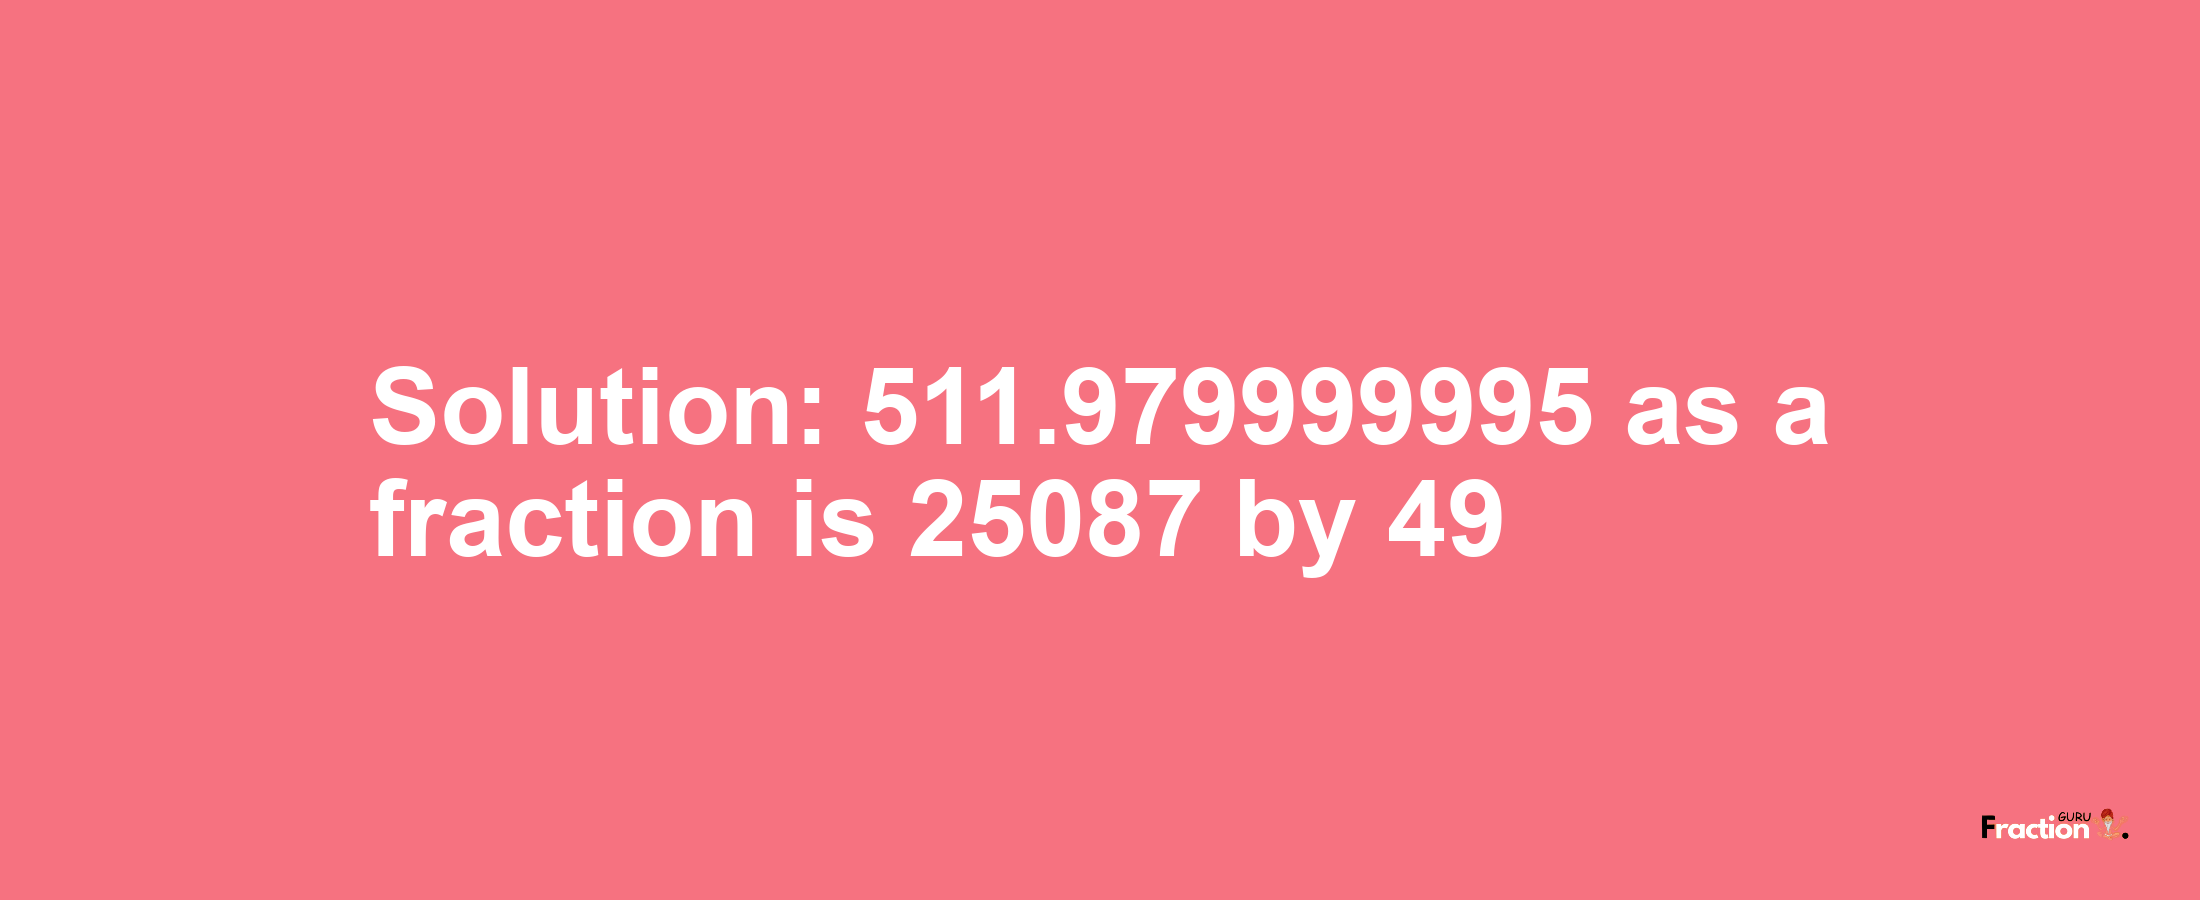 Solution:511.979999995 as a fraction is 25087/49